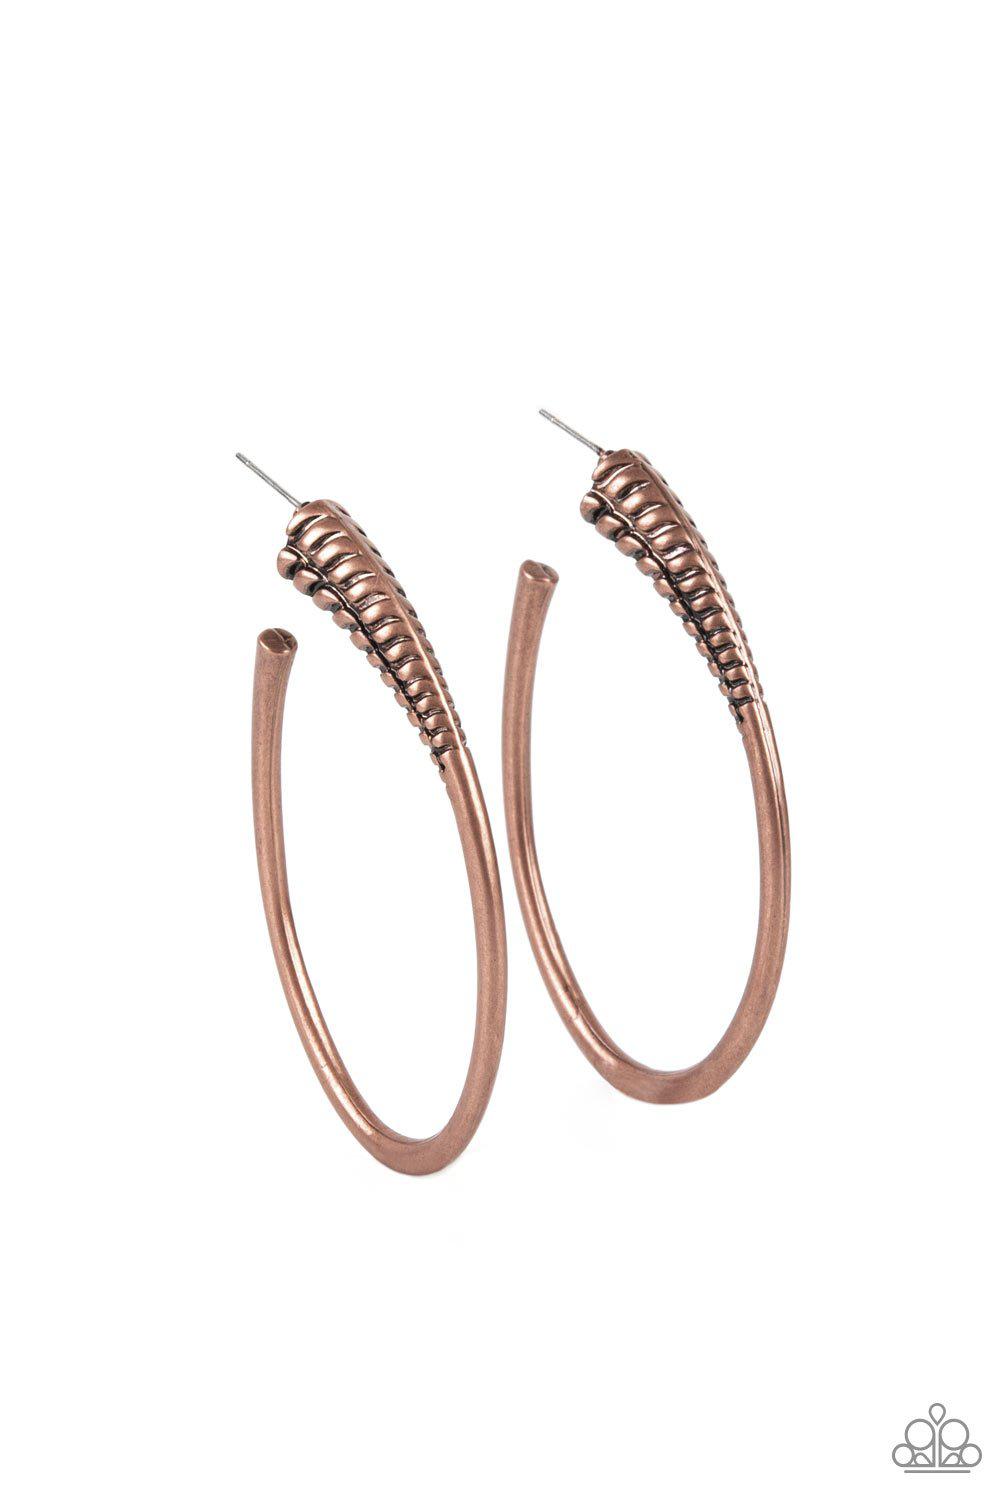 Fully Loaded Copper Hoop Earrings - Paparazzi Accessories- lightbox - CarasShop.com - $5 Jewelry by Cara Jewels